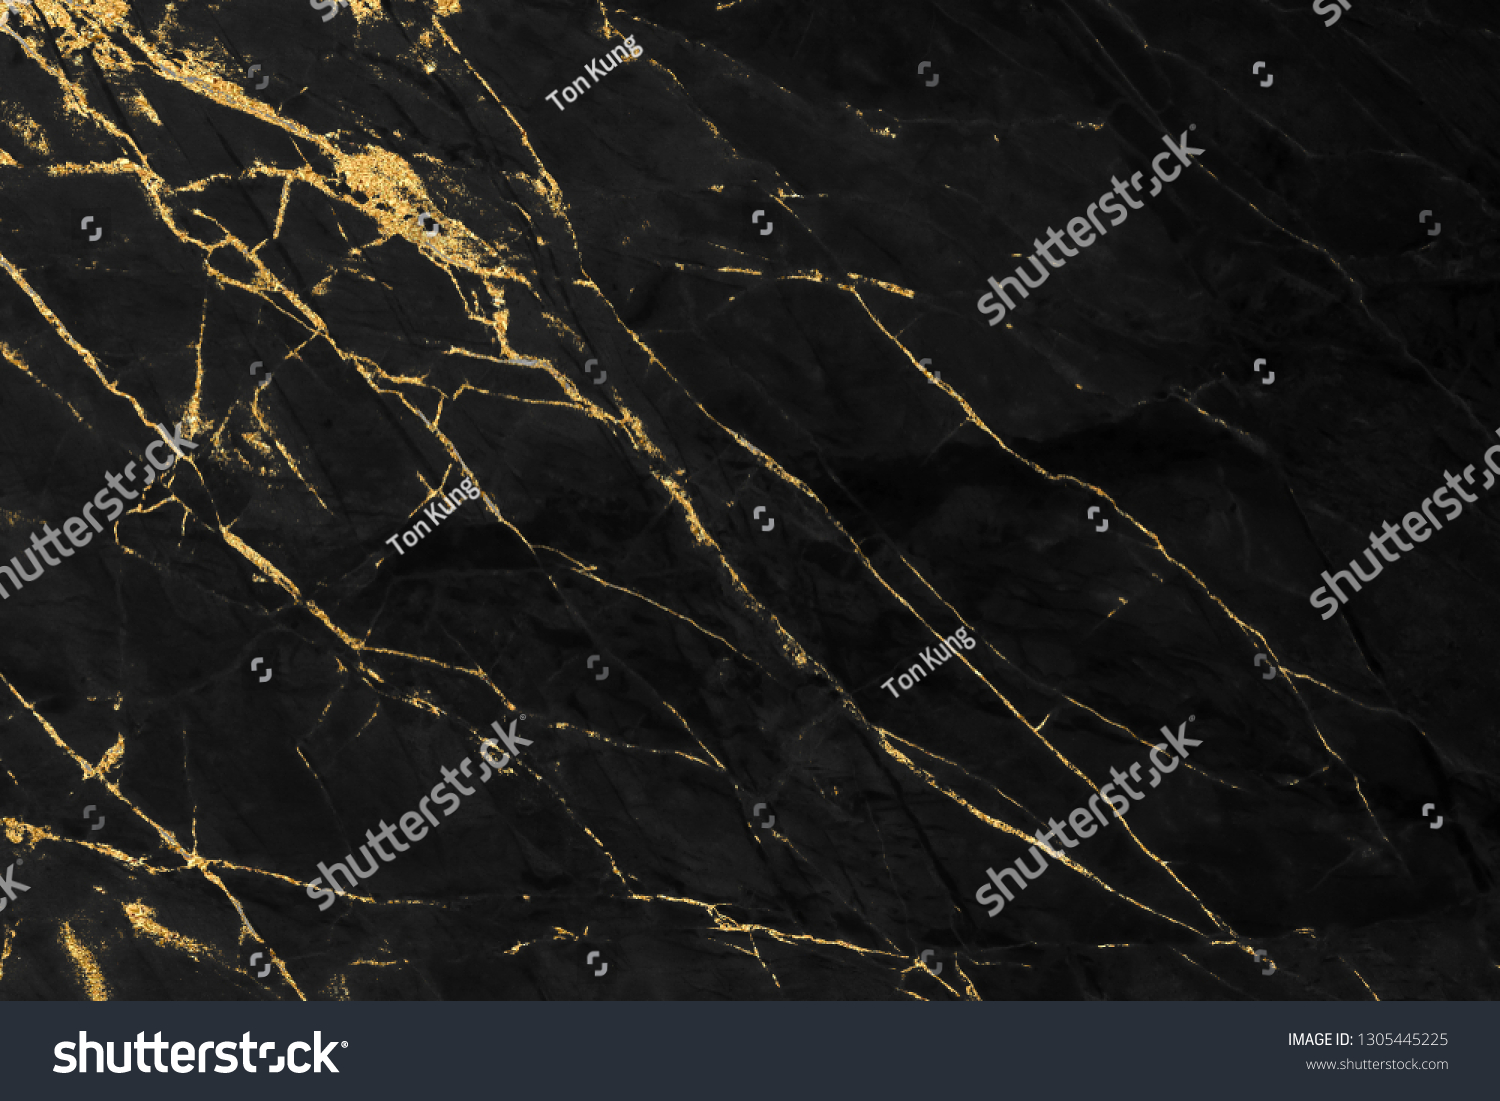 Black and gold marble texture design for cover book or brochure, poster, wallpaper background or realistic business and design artwork. #1305445225